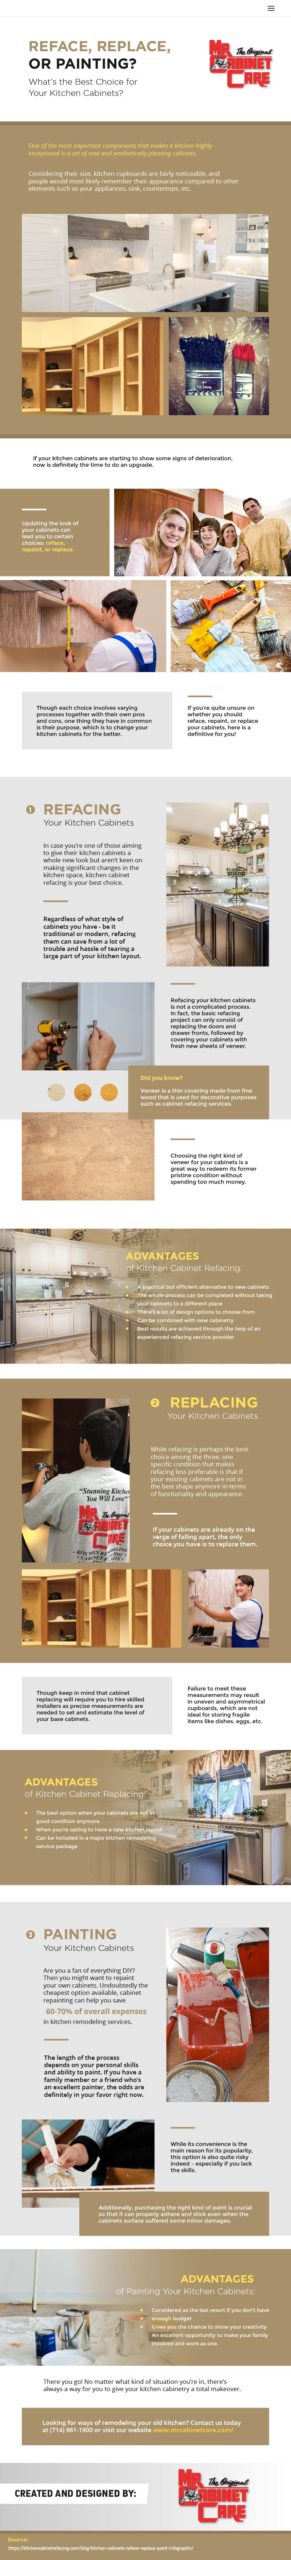 Refacing Replacing Or Painting What S The Best Choice For Your